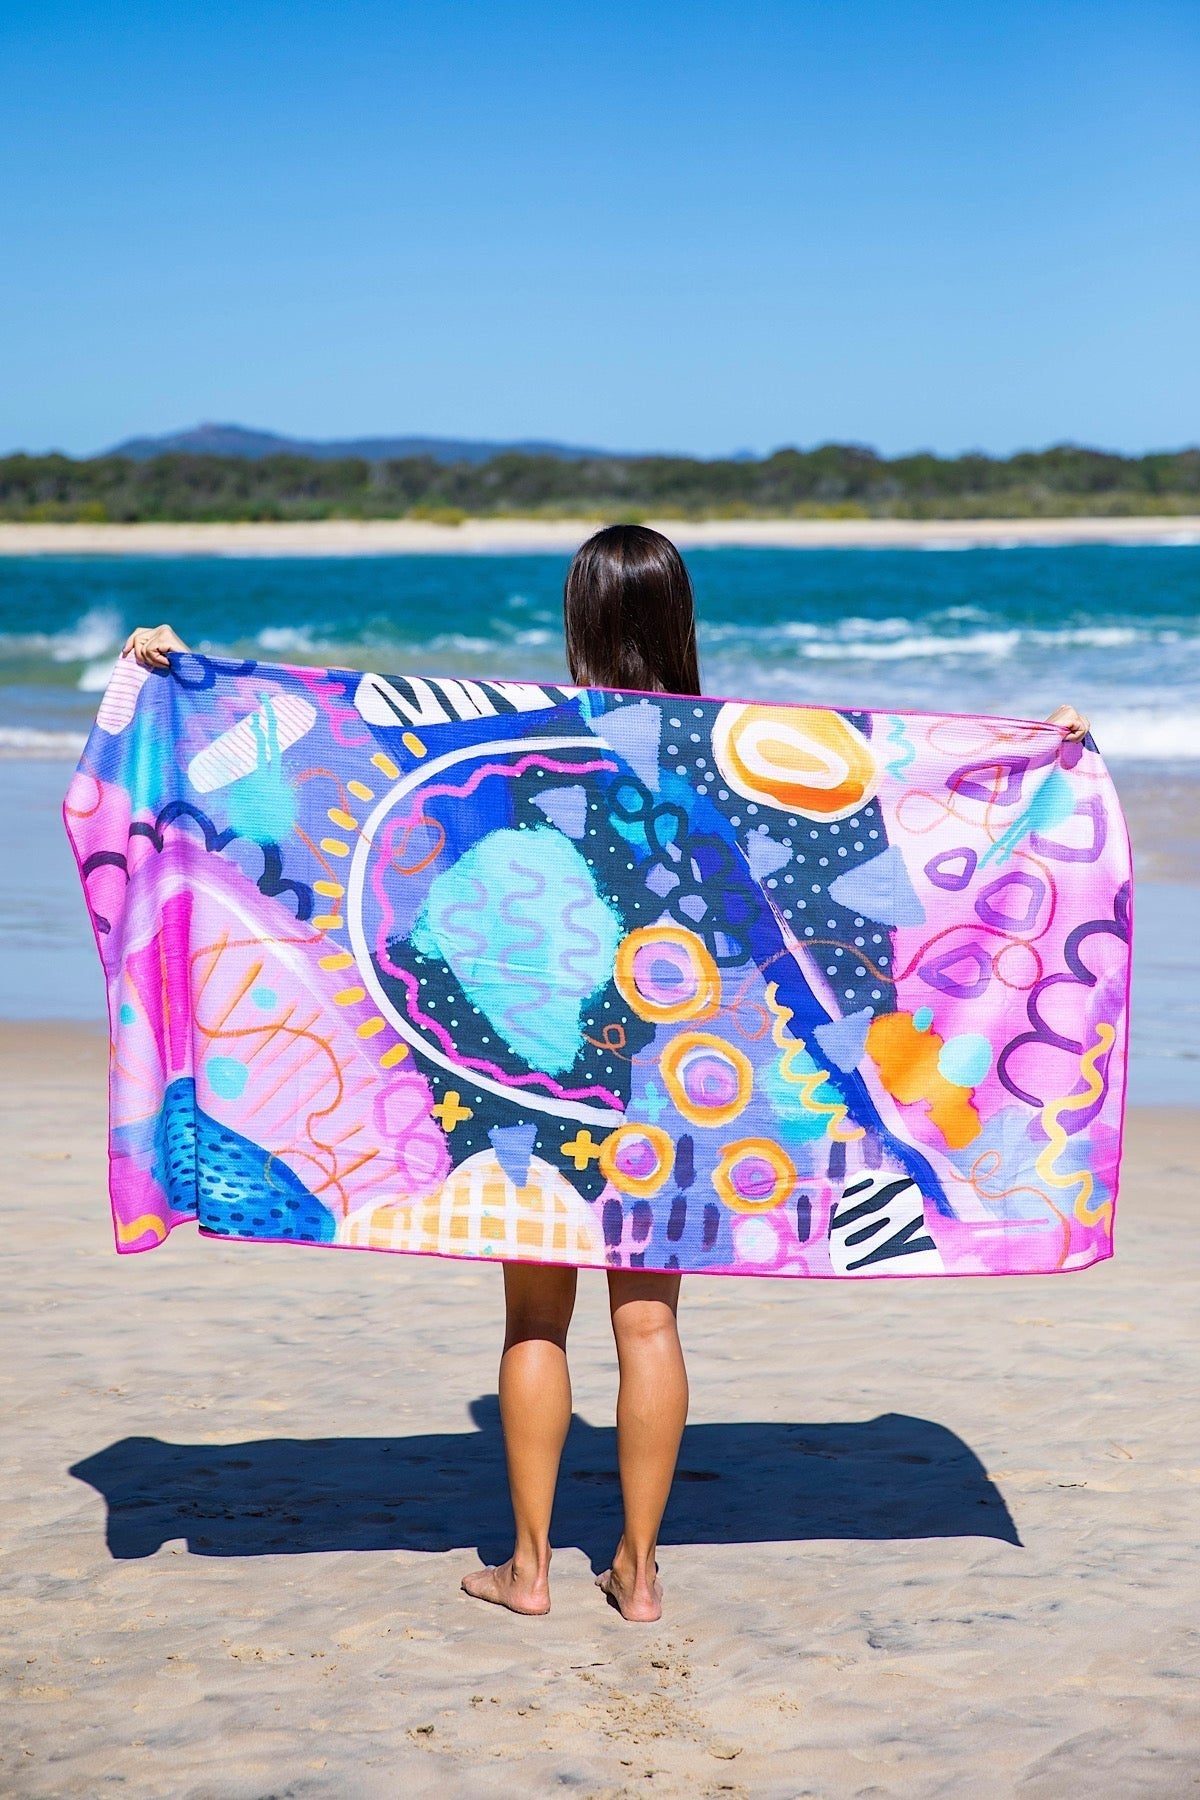 Make an Extra Large Beach Blanket from Towels